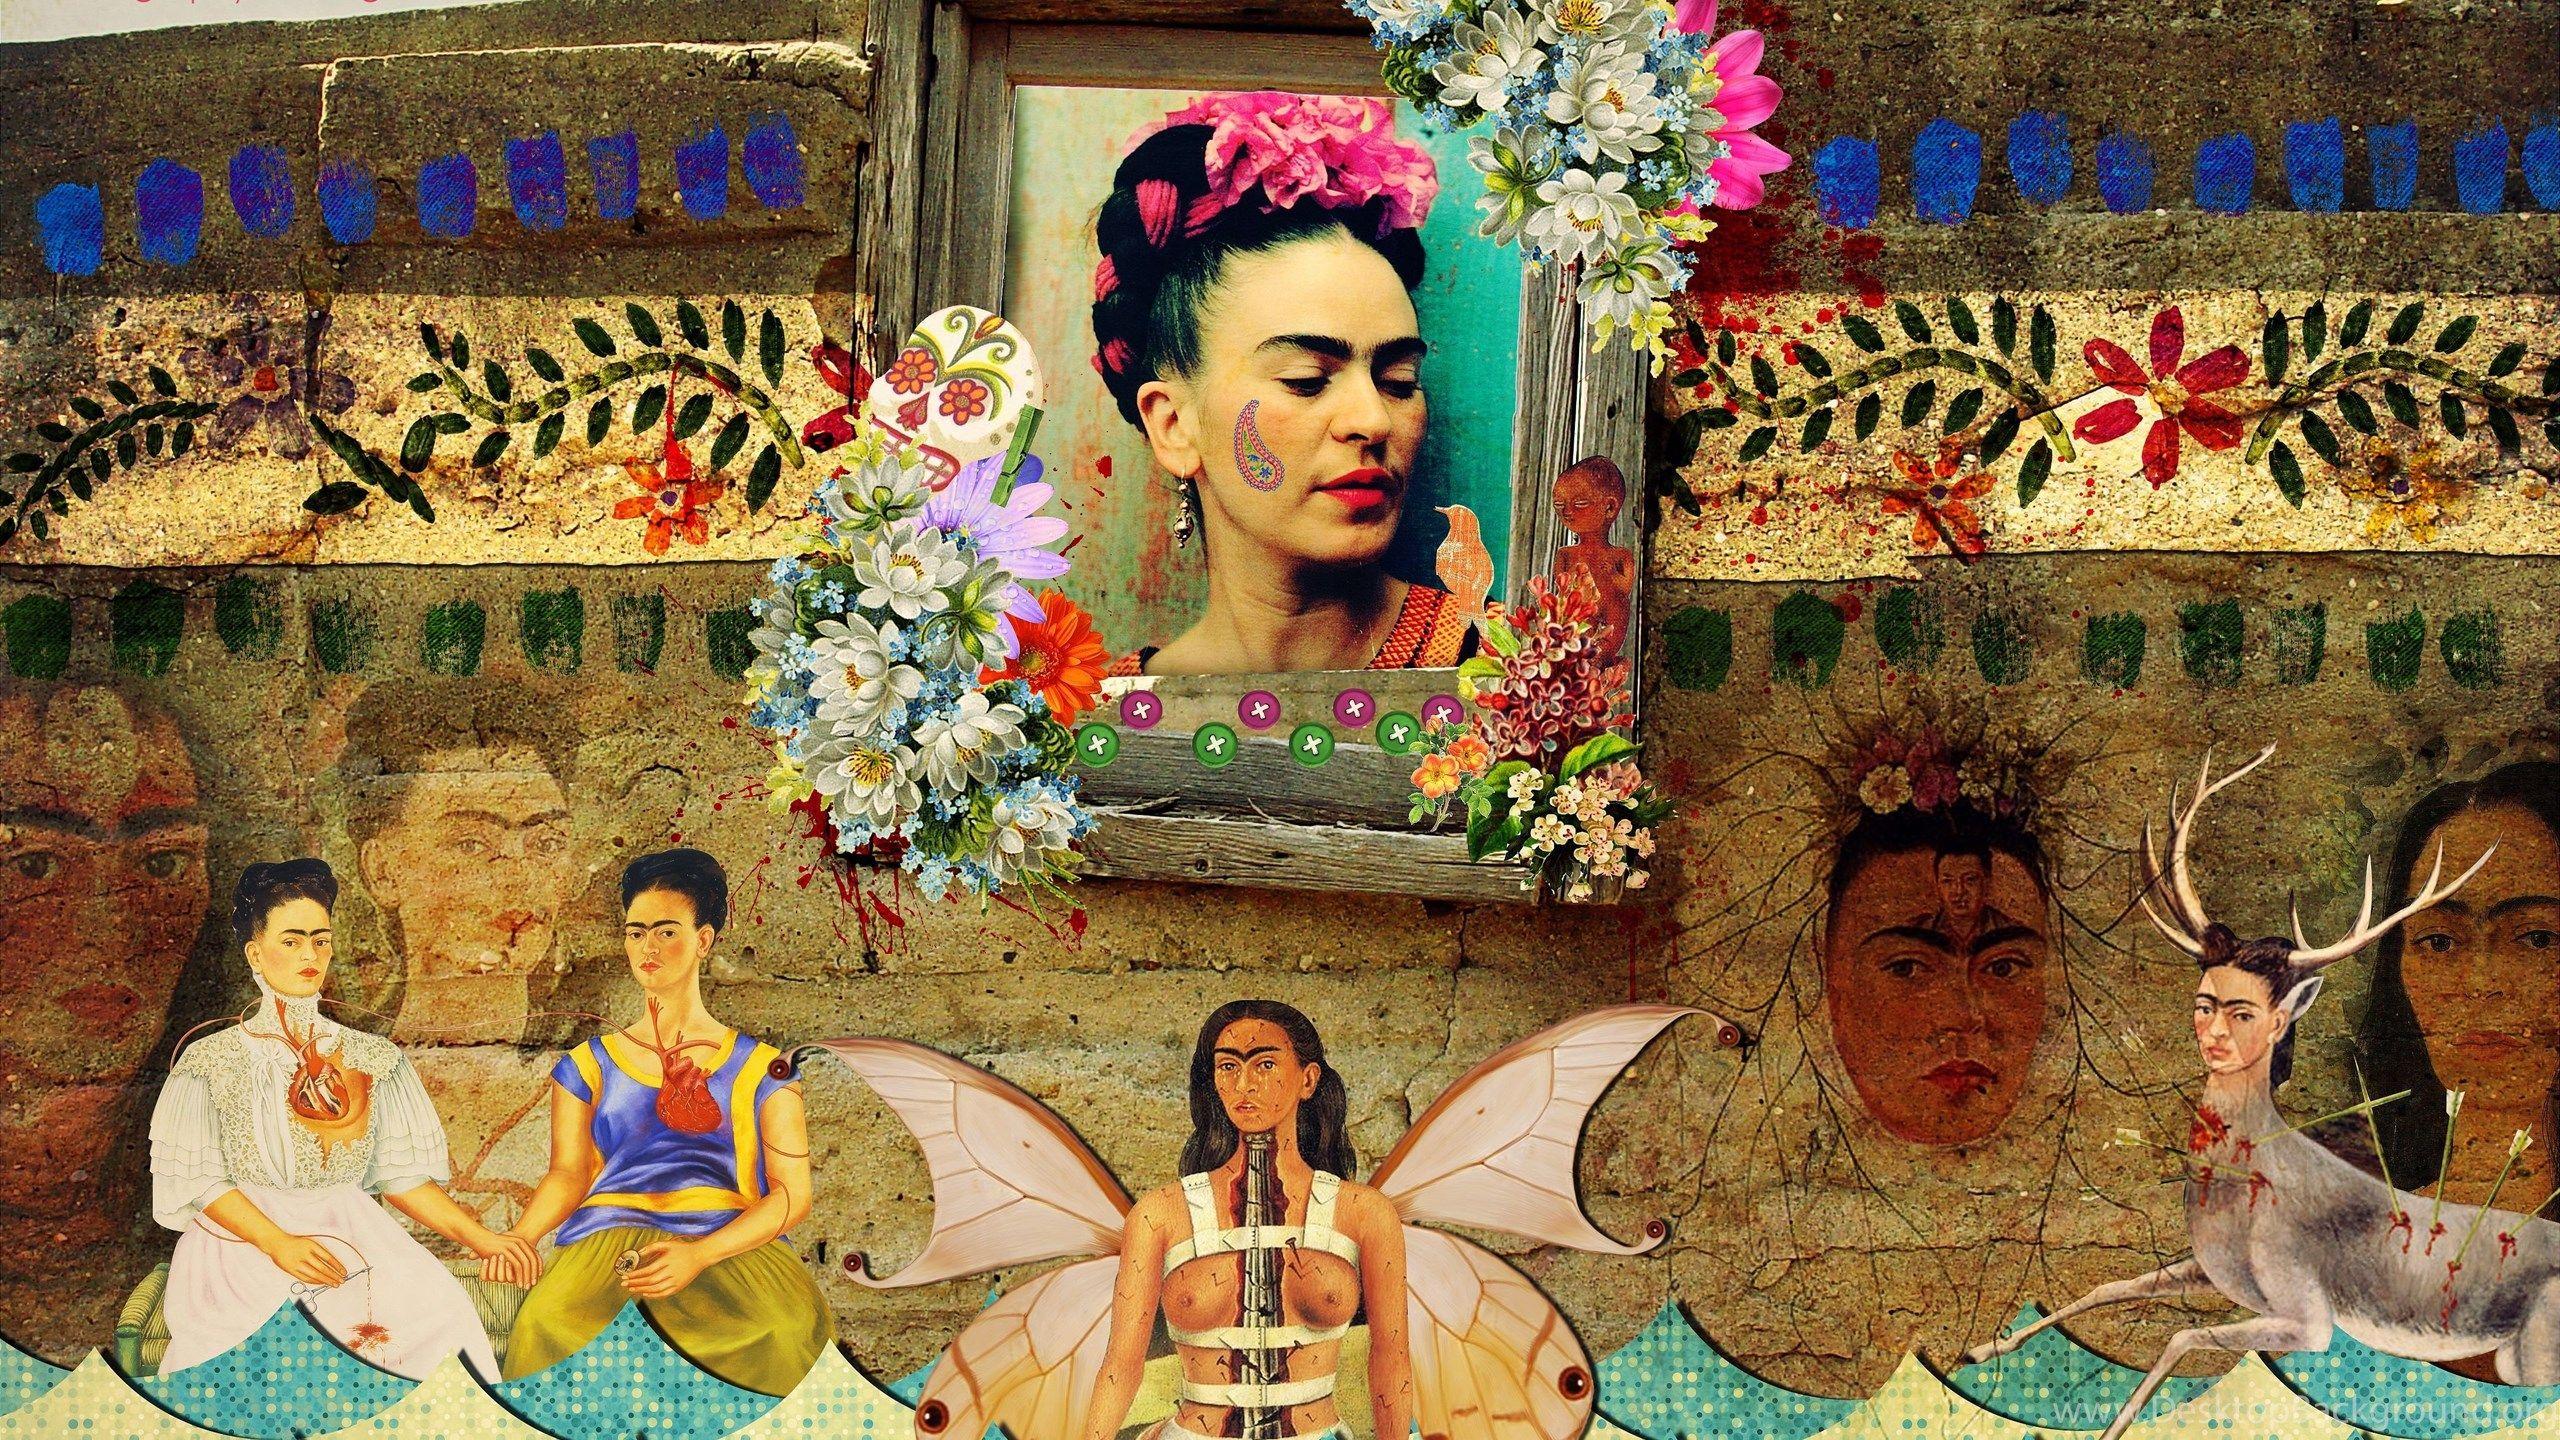 A collage of Frida Kahlo's paintings and photographs - Frida Kahlo